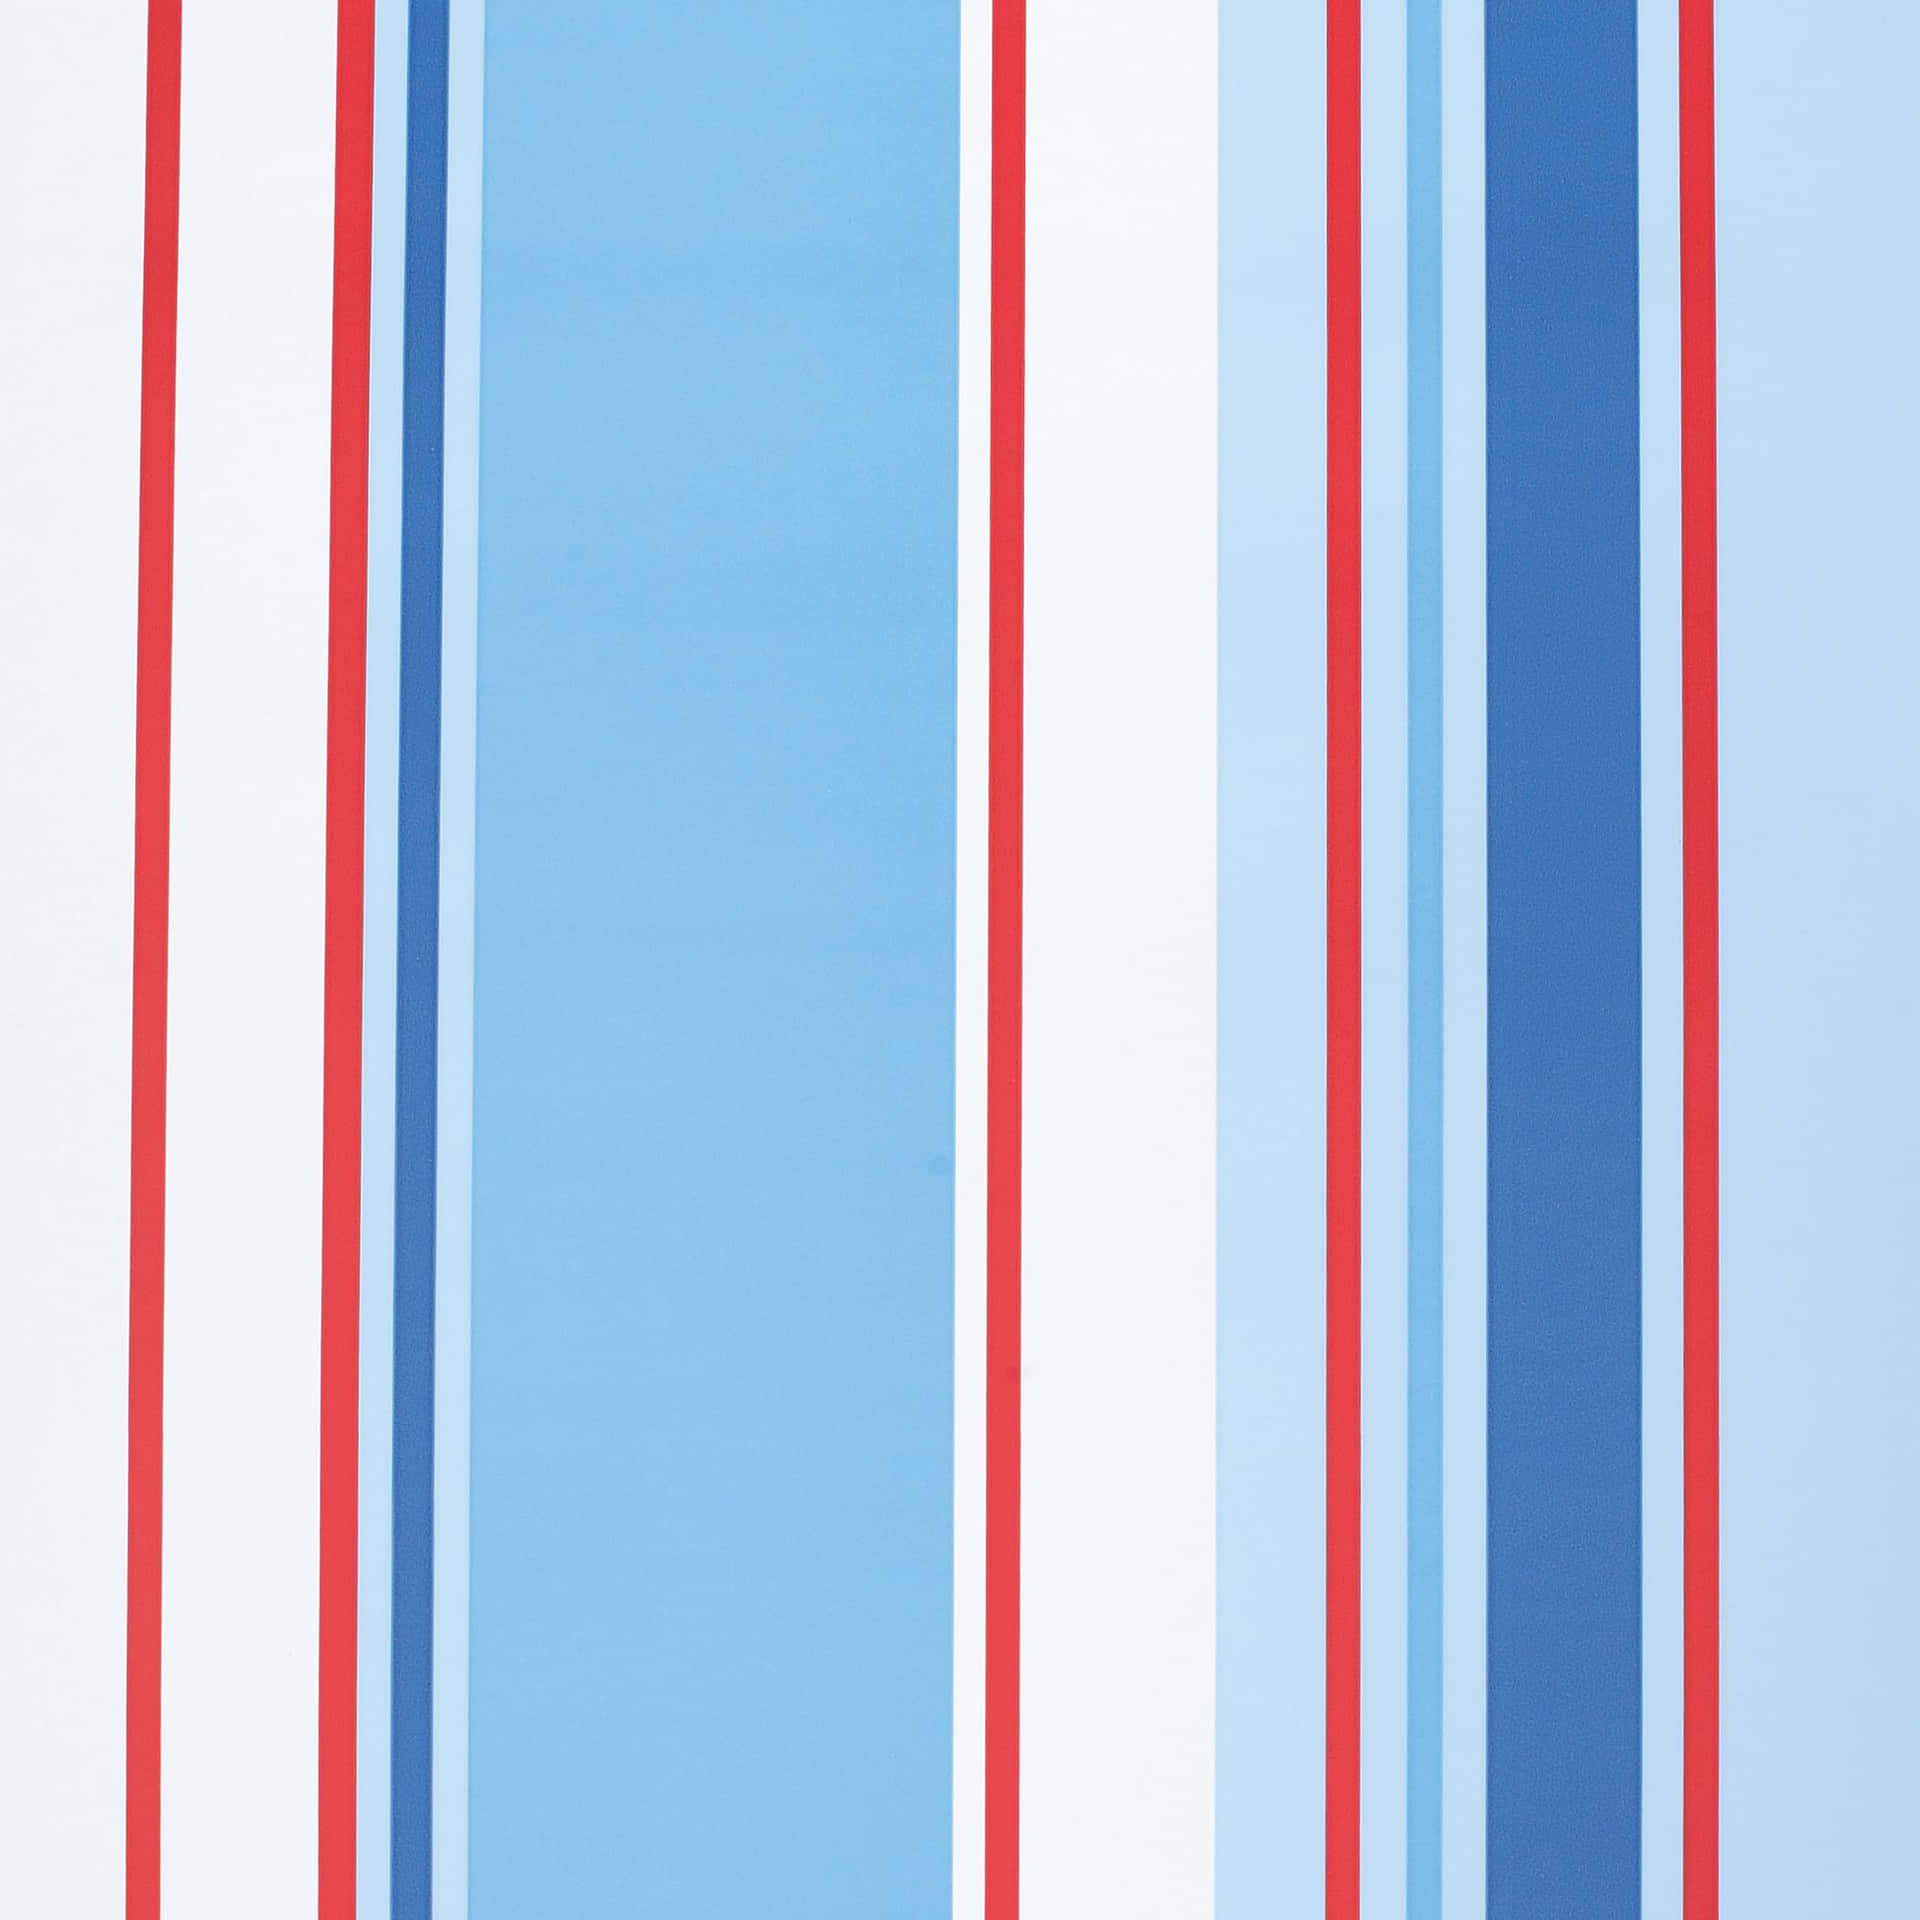 Vertical Lines And Bars Red White And Blue Background